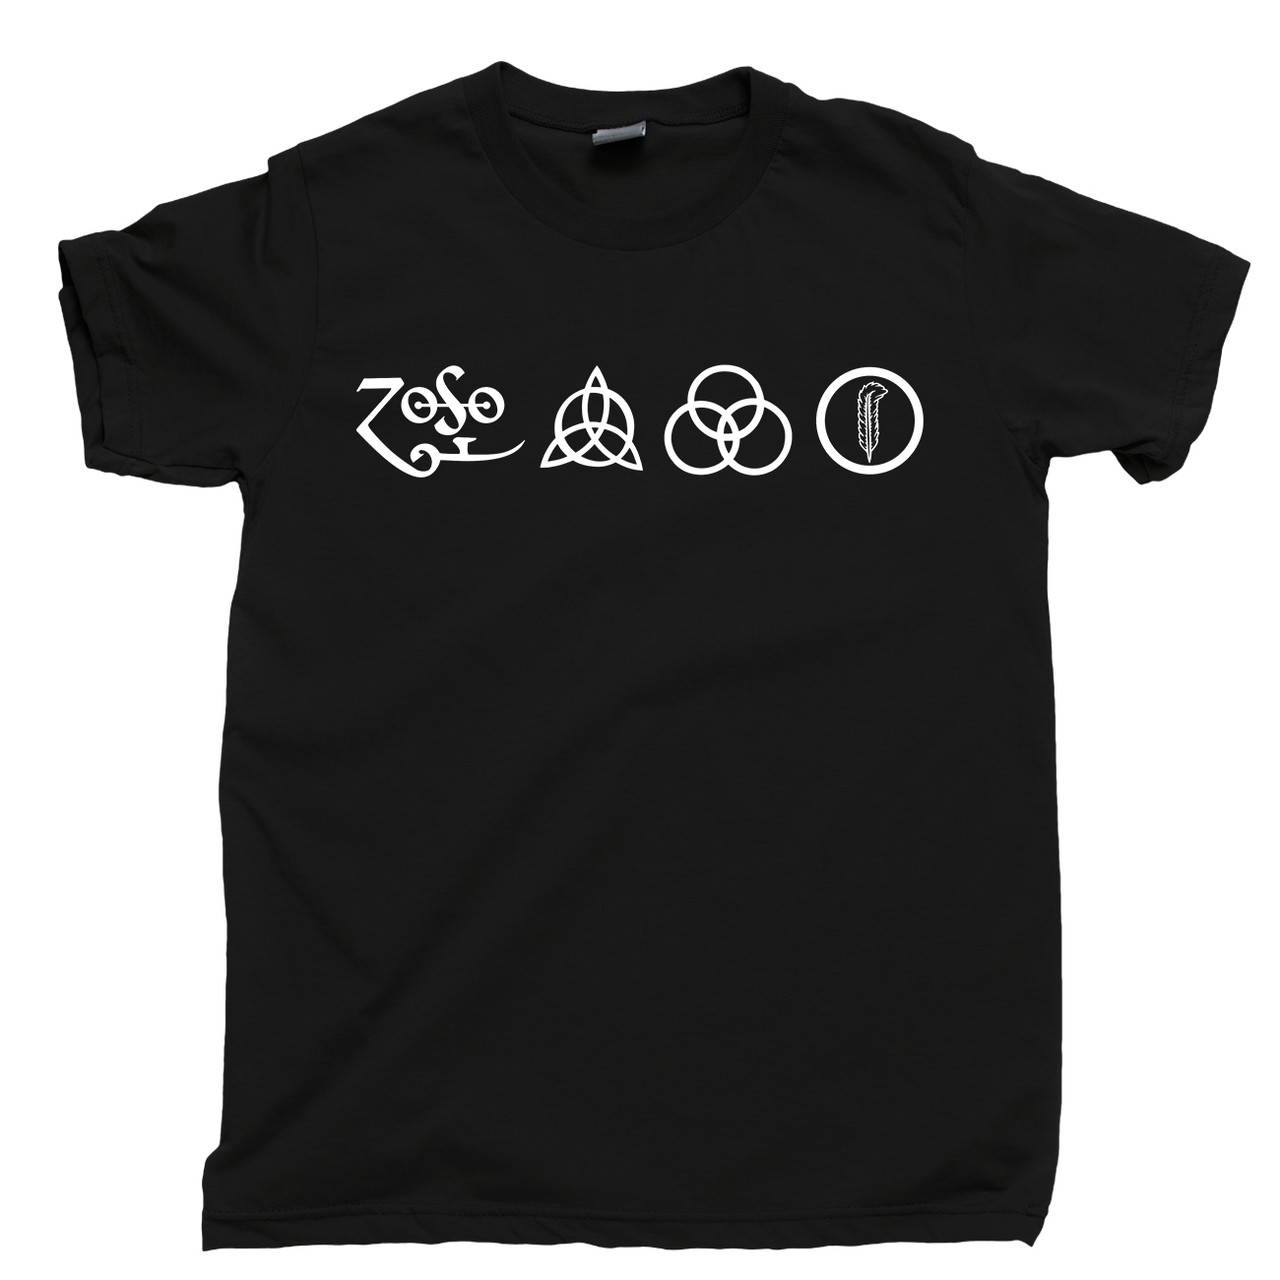 Led Zeppelin 4 Symbols T Shirt - Stairway To Heaven, Page And Plant, Zoso  Tee